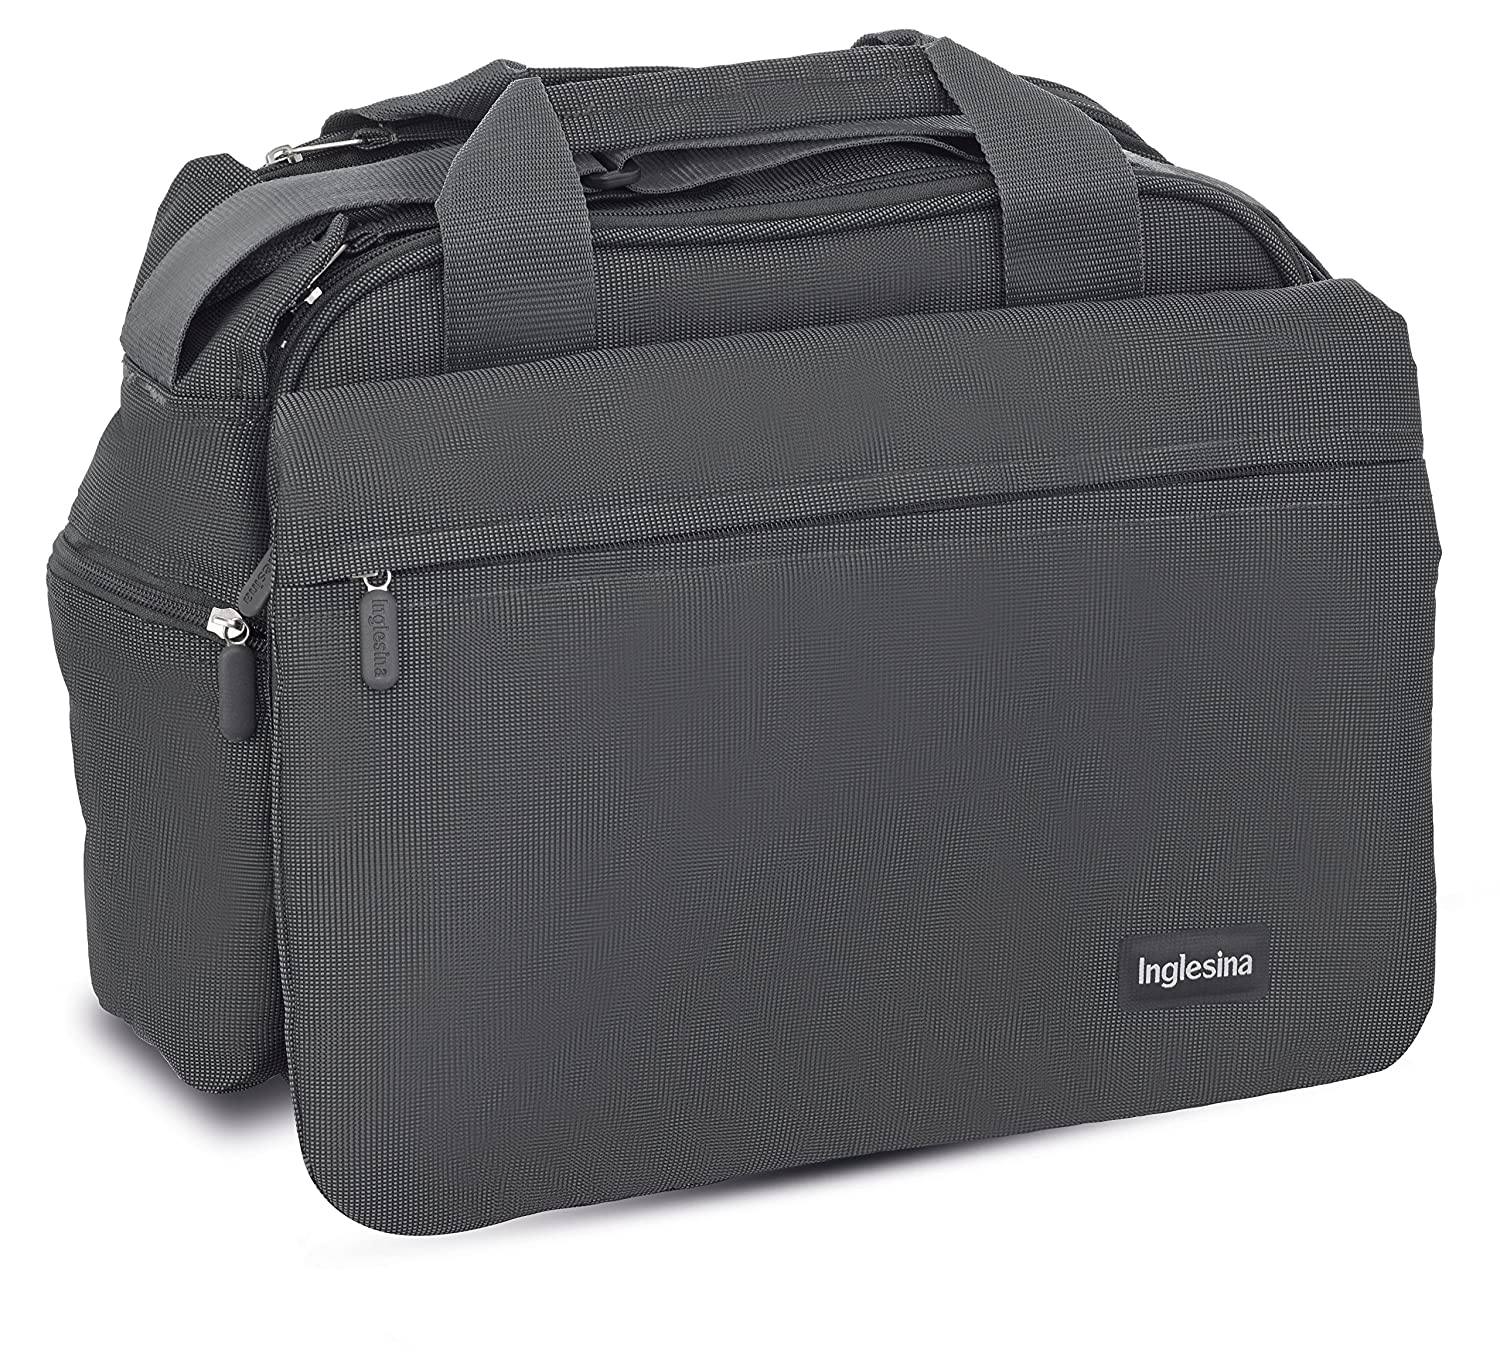 Inglesina AX9 0D0CRE Elegant Bag Can Be Changing Bag Large Inside Fits Many Anlaässen graphite